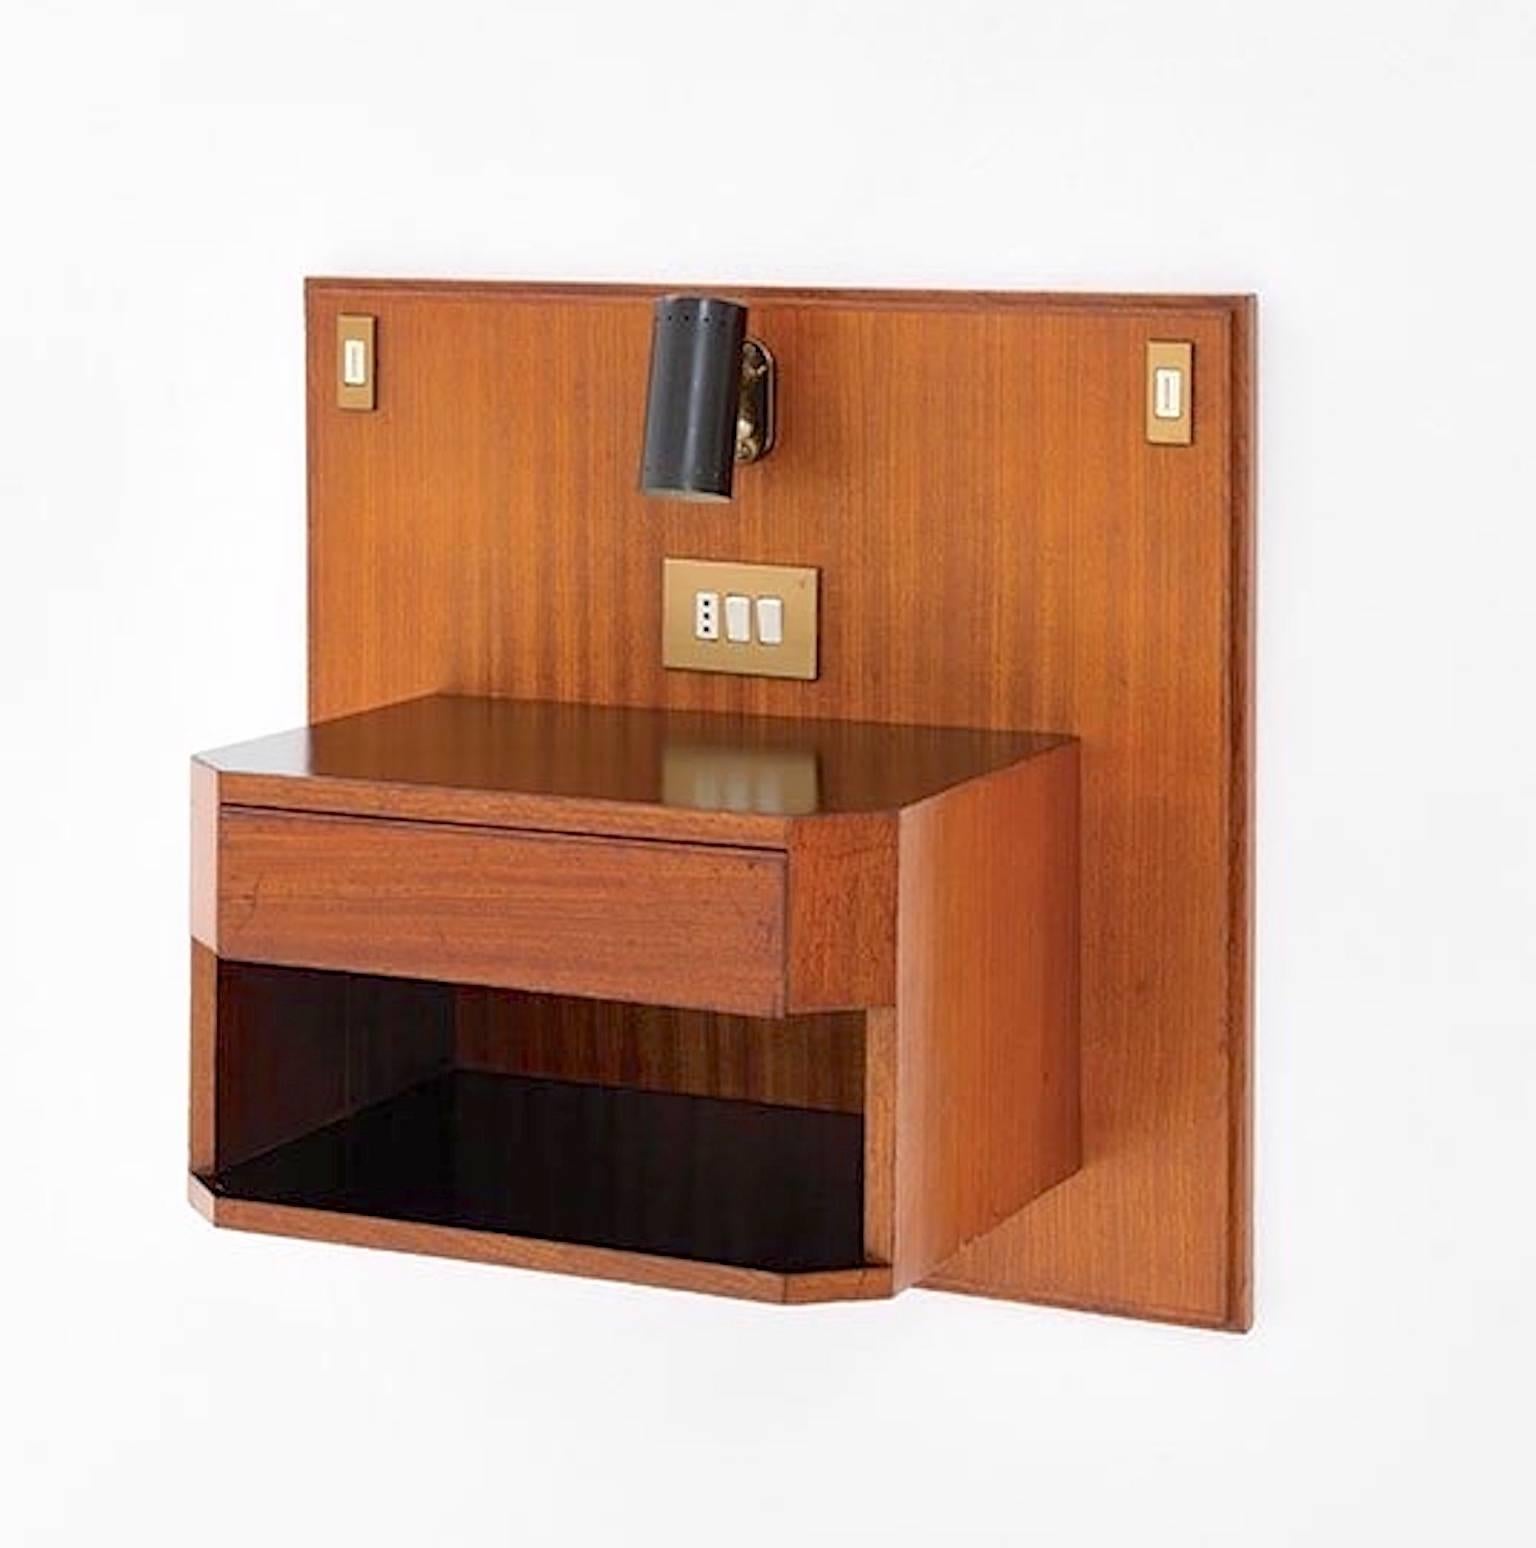 Ico Parisi hanging nightstand.

Designed for hotel Lorena, Grosseto in 1961.

Produced by Bernini.

The adjustable lamp was produced by the firm Greco.

Features one drawer above a storage compartment.

Literature: Domus 1960-1964, Volume